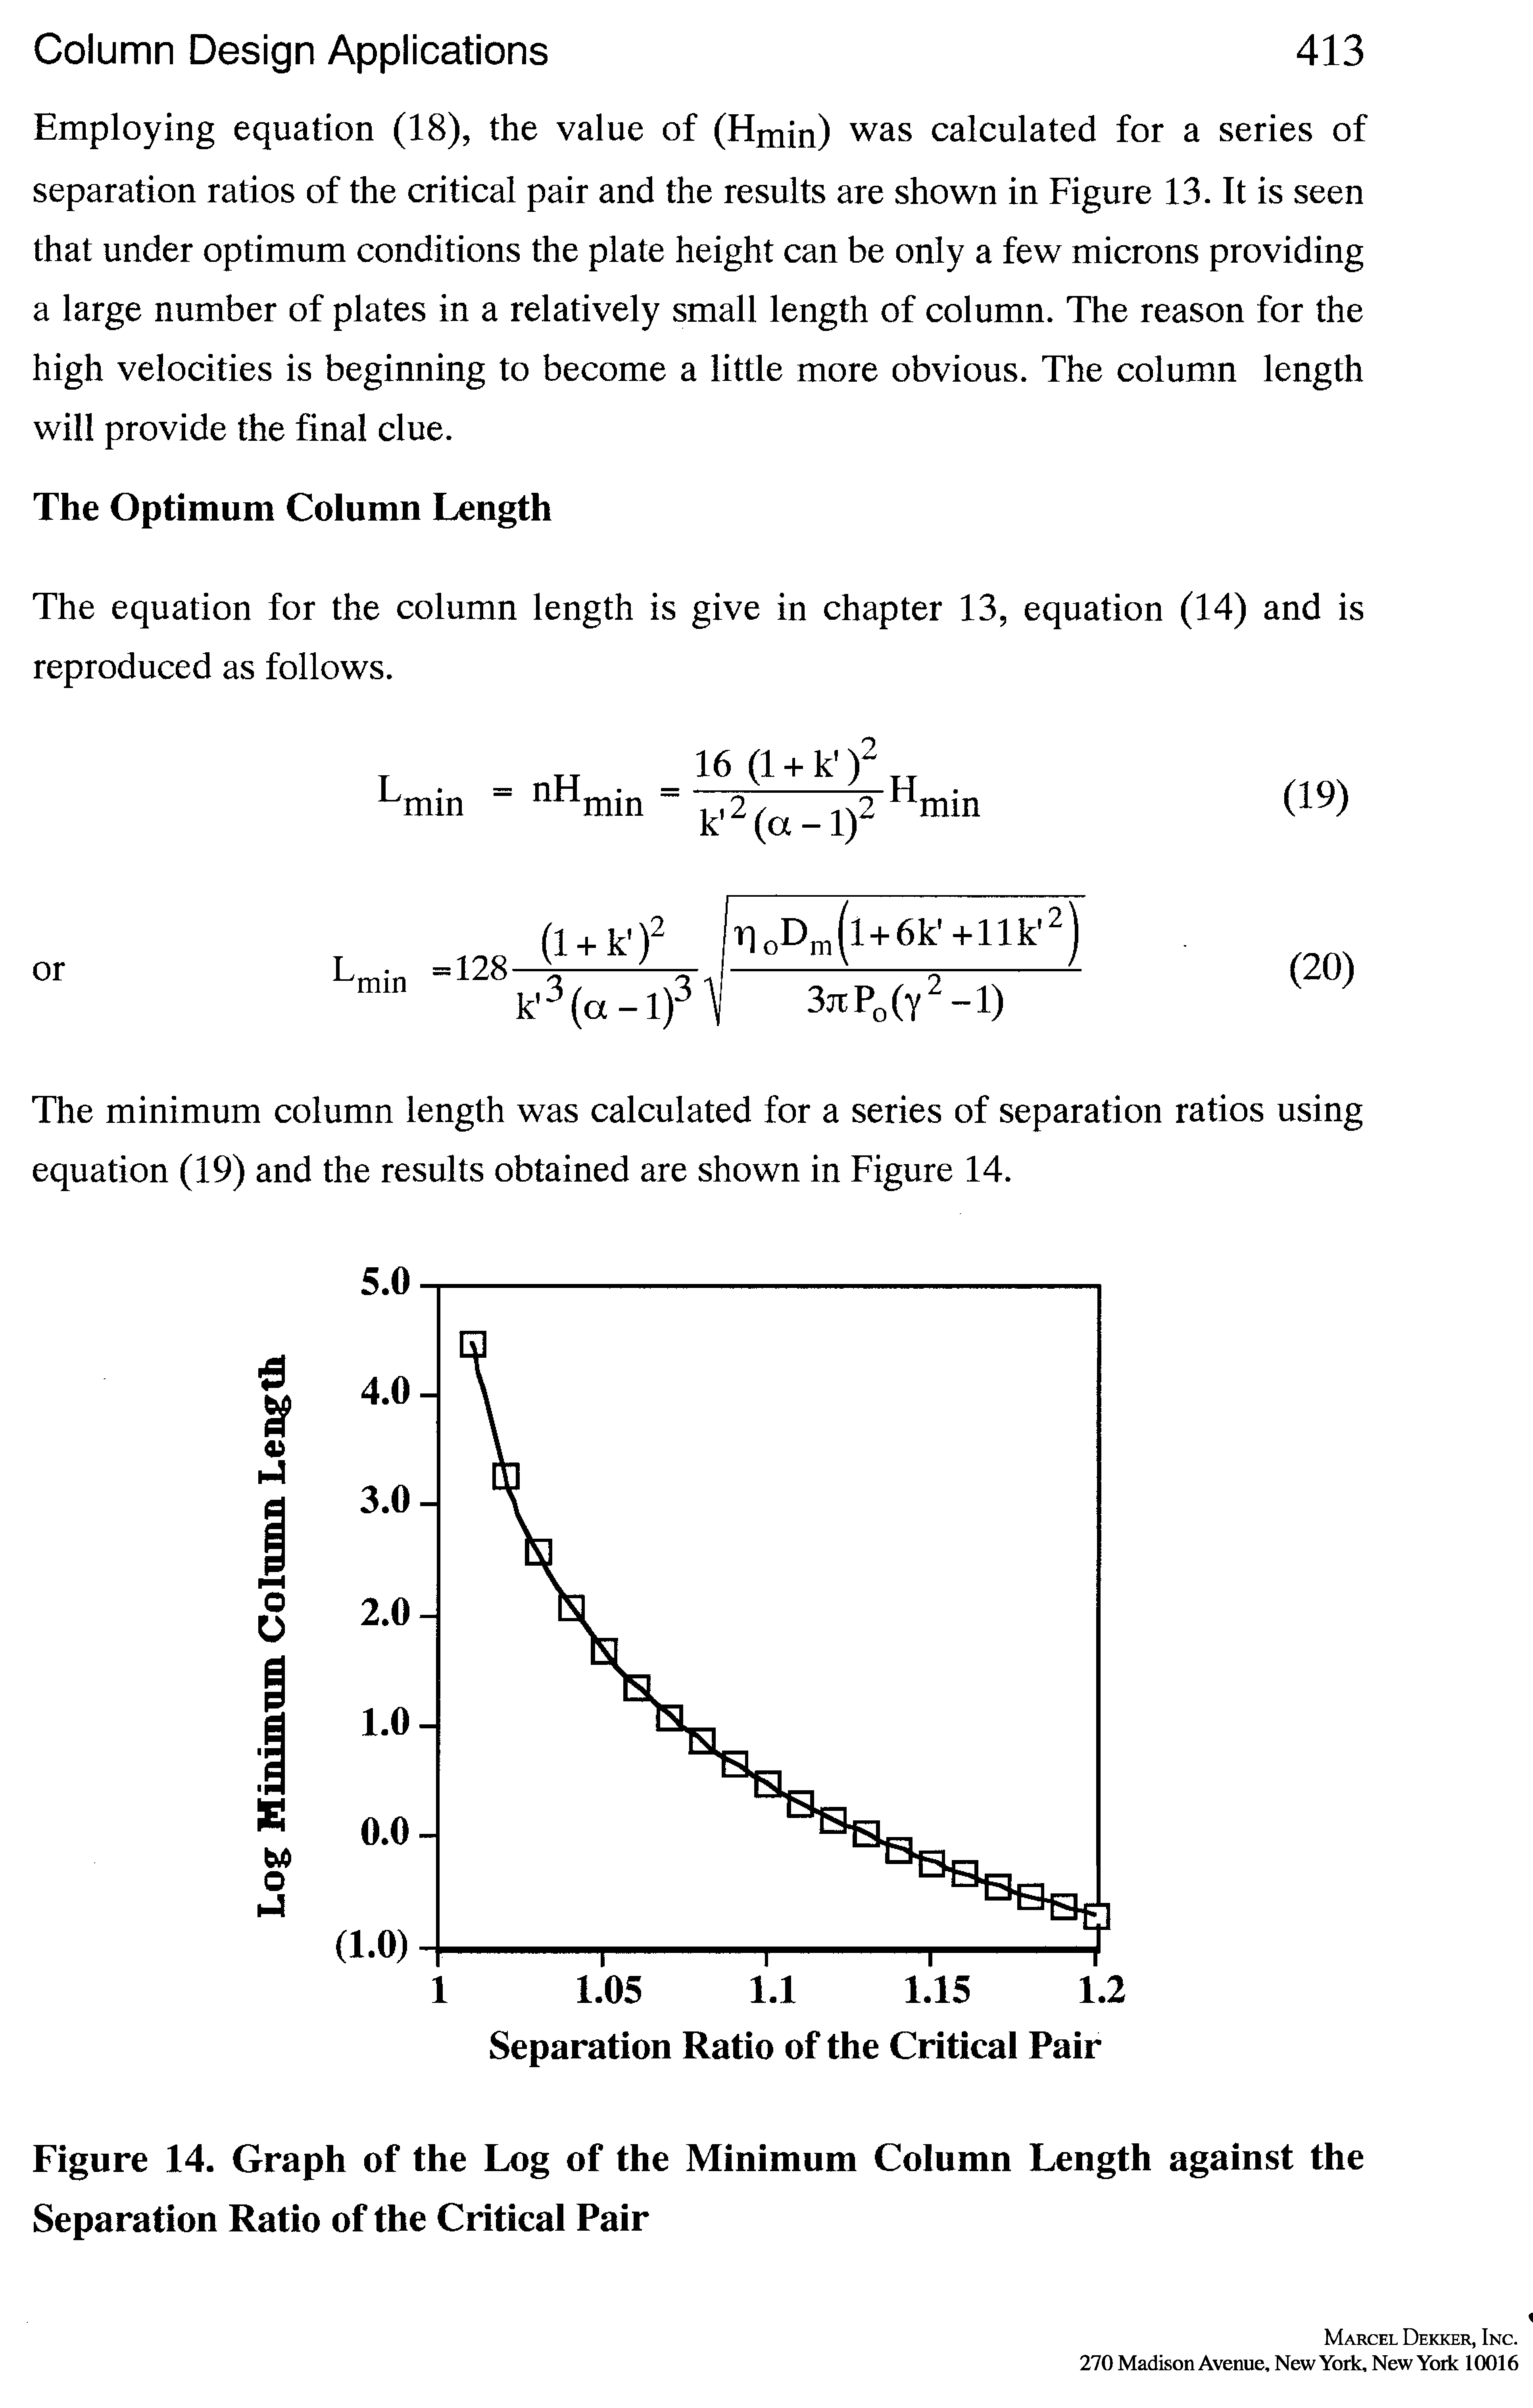 Figure 14. Graph of the Log of the Minimum Column Length against the Separation Ratio of the Critical Pair...